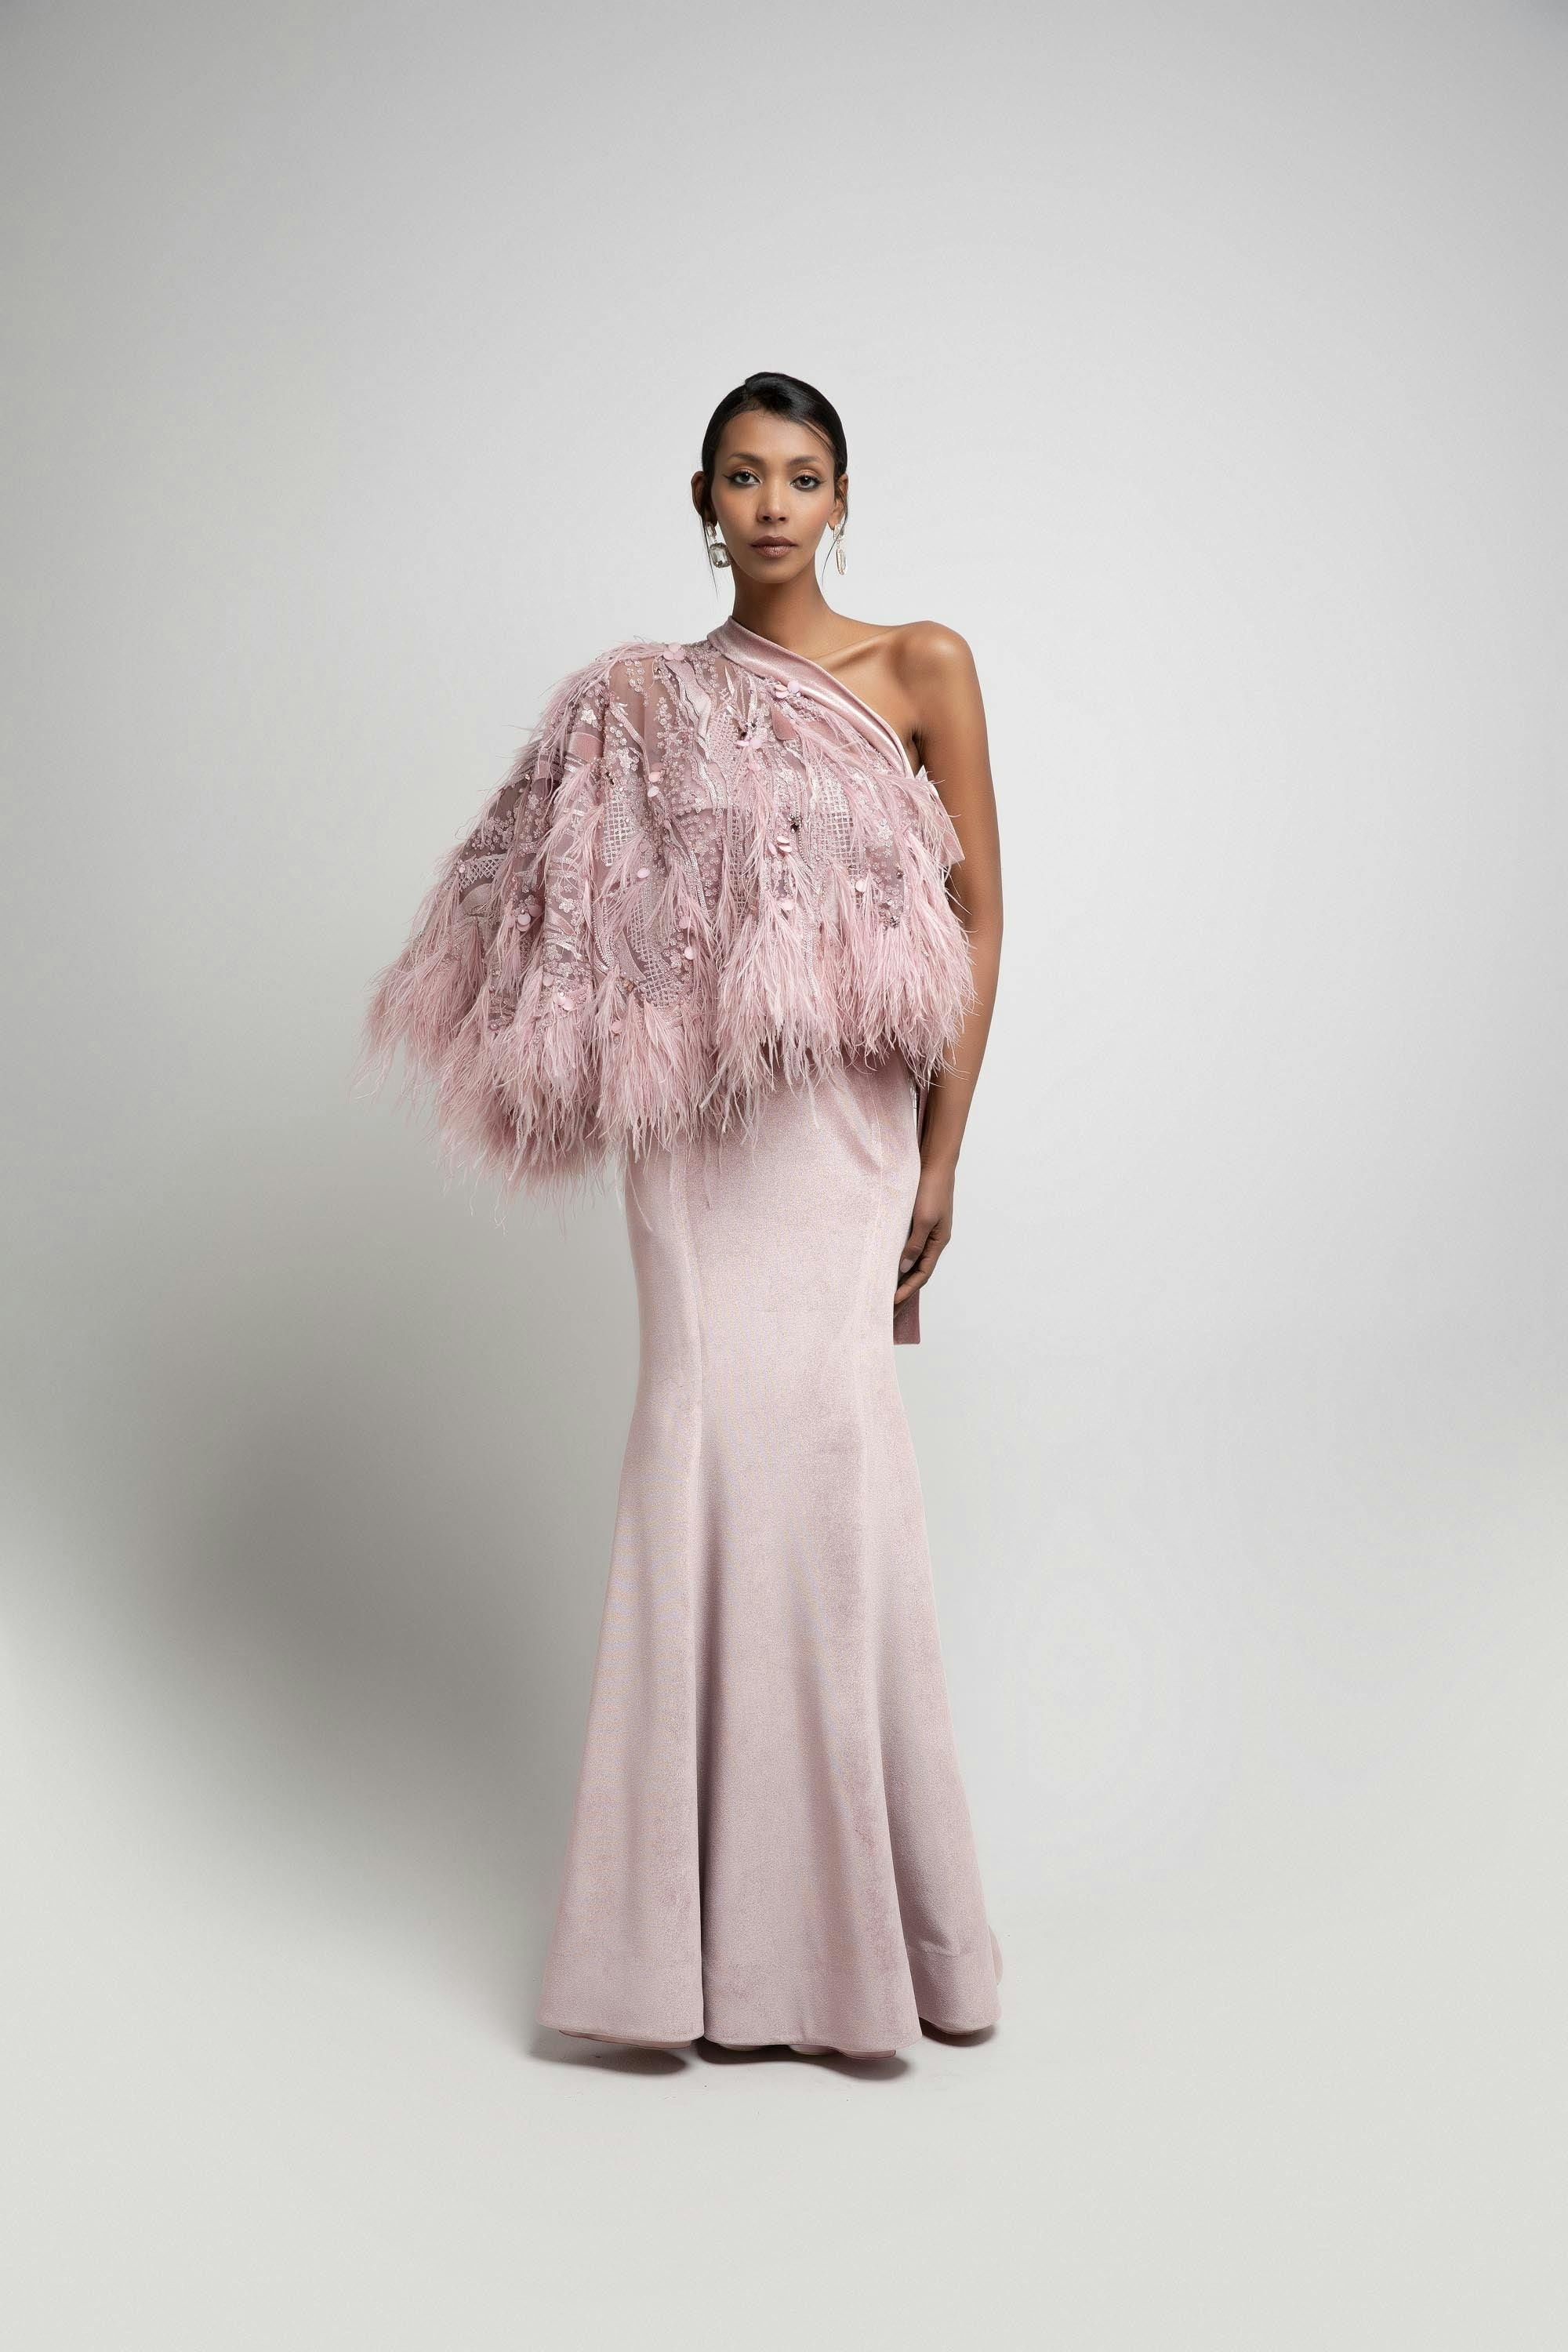 Look 21 - Jean fares couture-JFC - maxi pink dress with one feathers shoulder